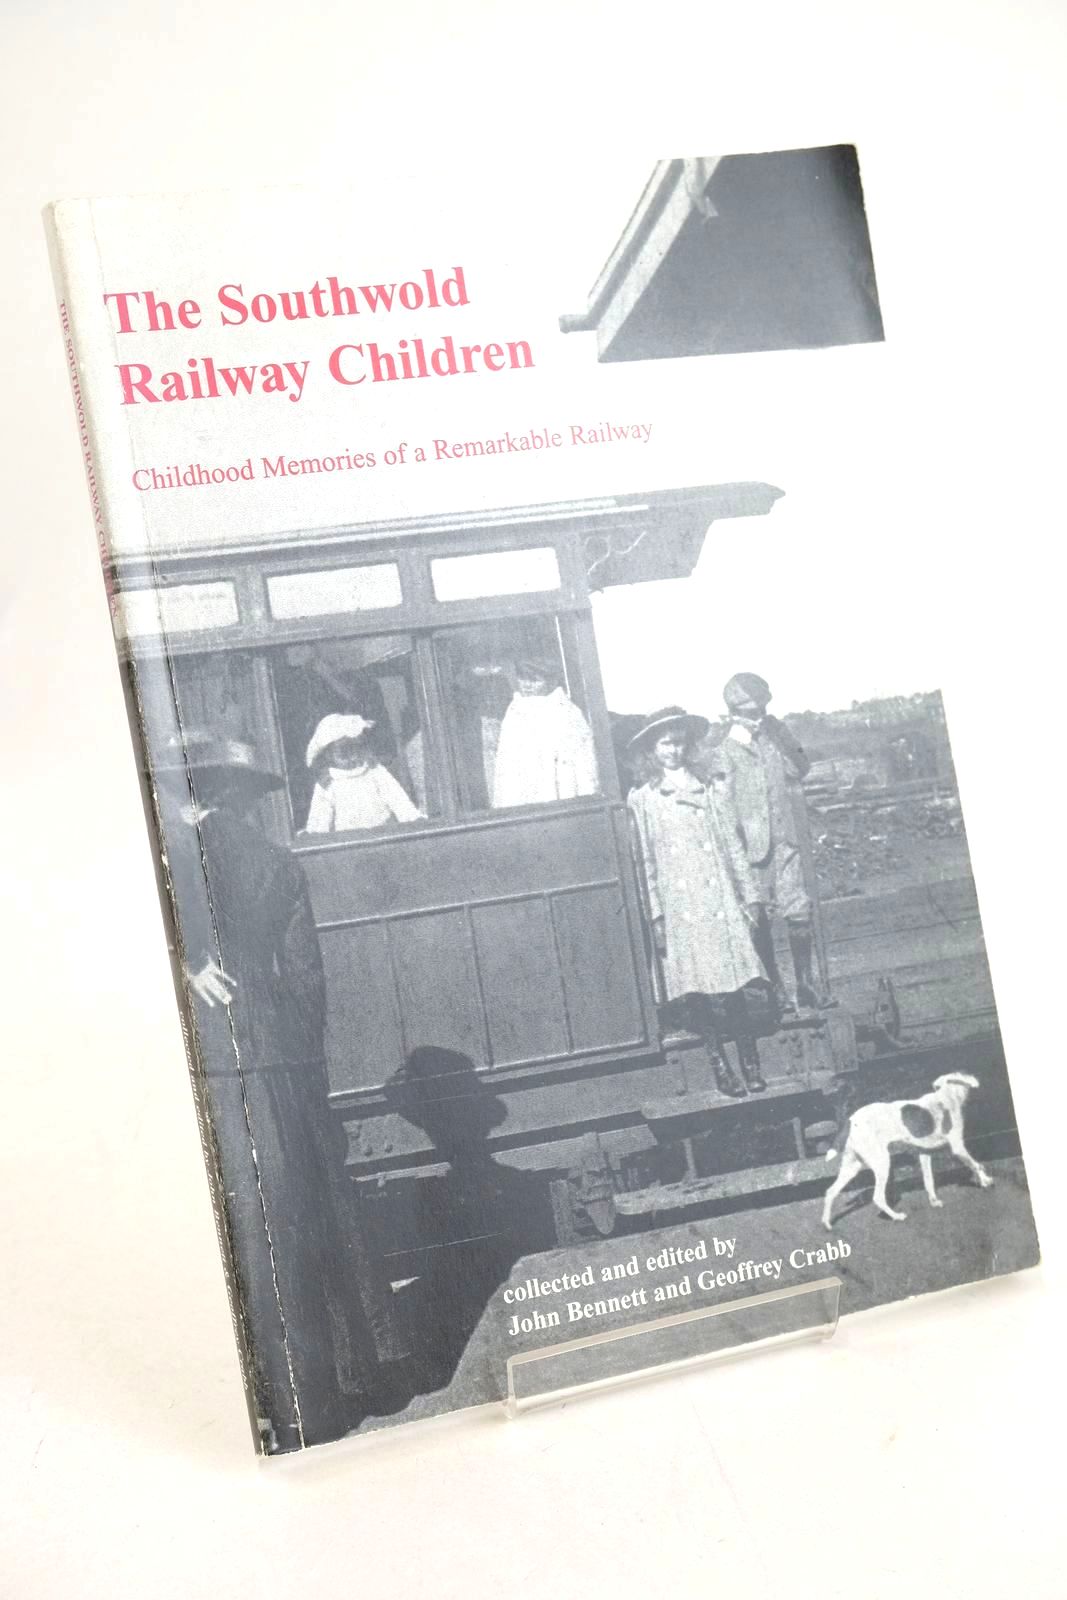 Photo of THE SOUTHWOLD RAILWAY CHILDREN written by Bennett, John Crabb, Geoffrey published by The Southwold Railway Society (STOCK CODE: 1327488)  for sale by Stella & Rose's Books